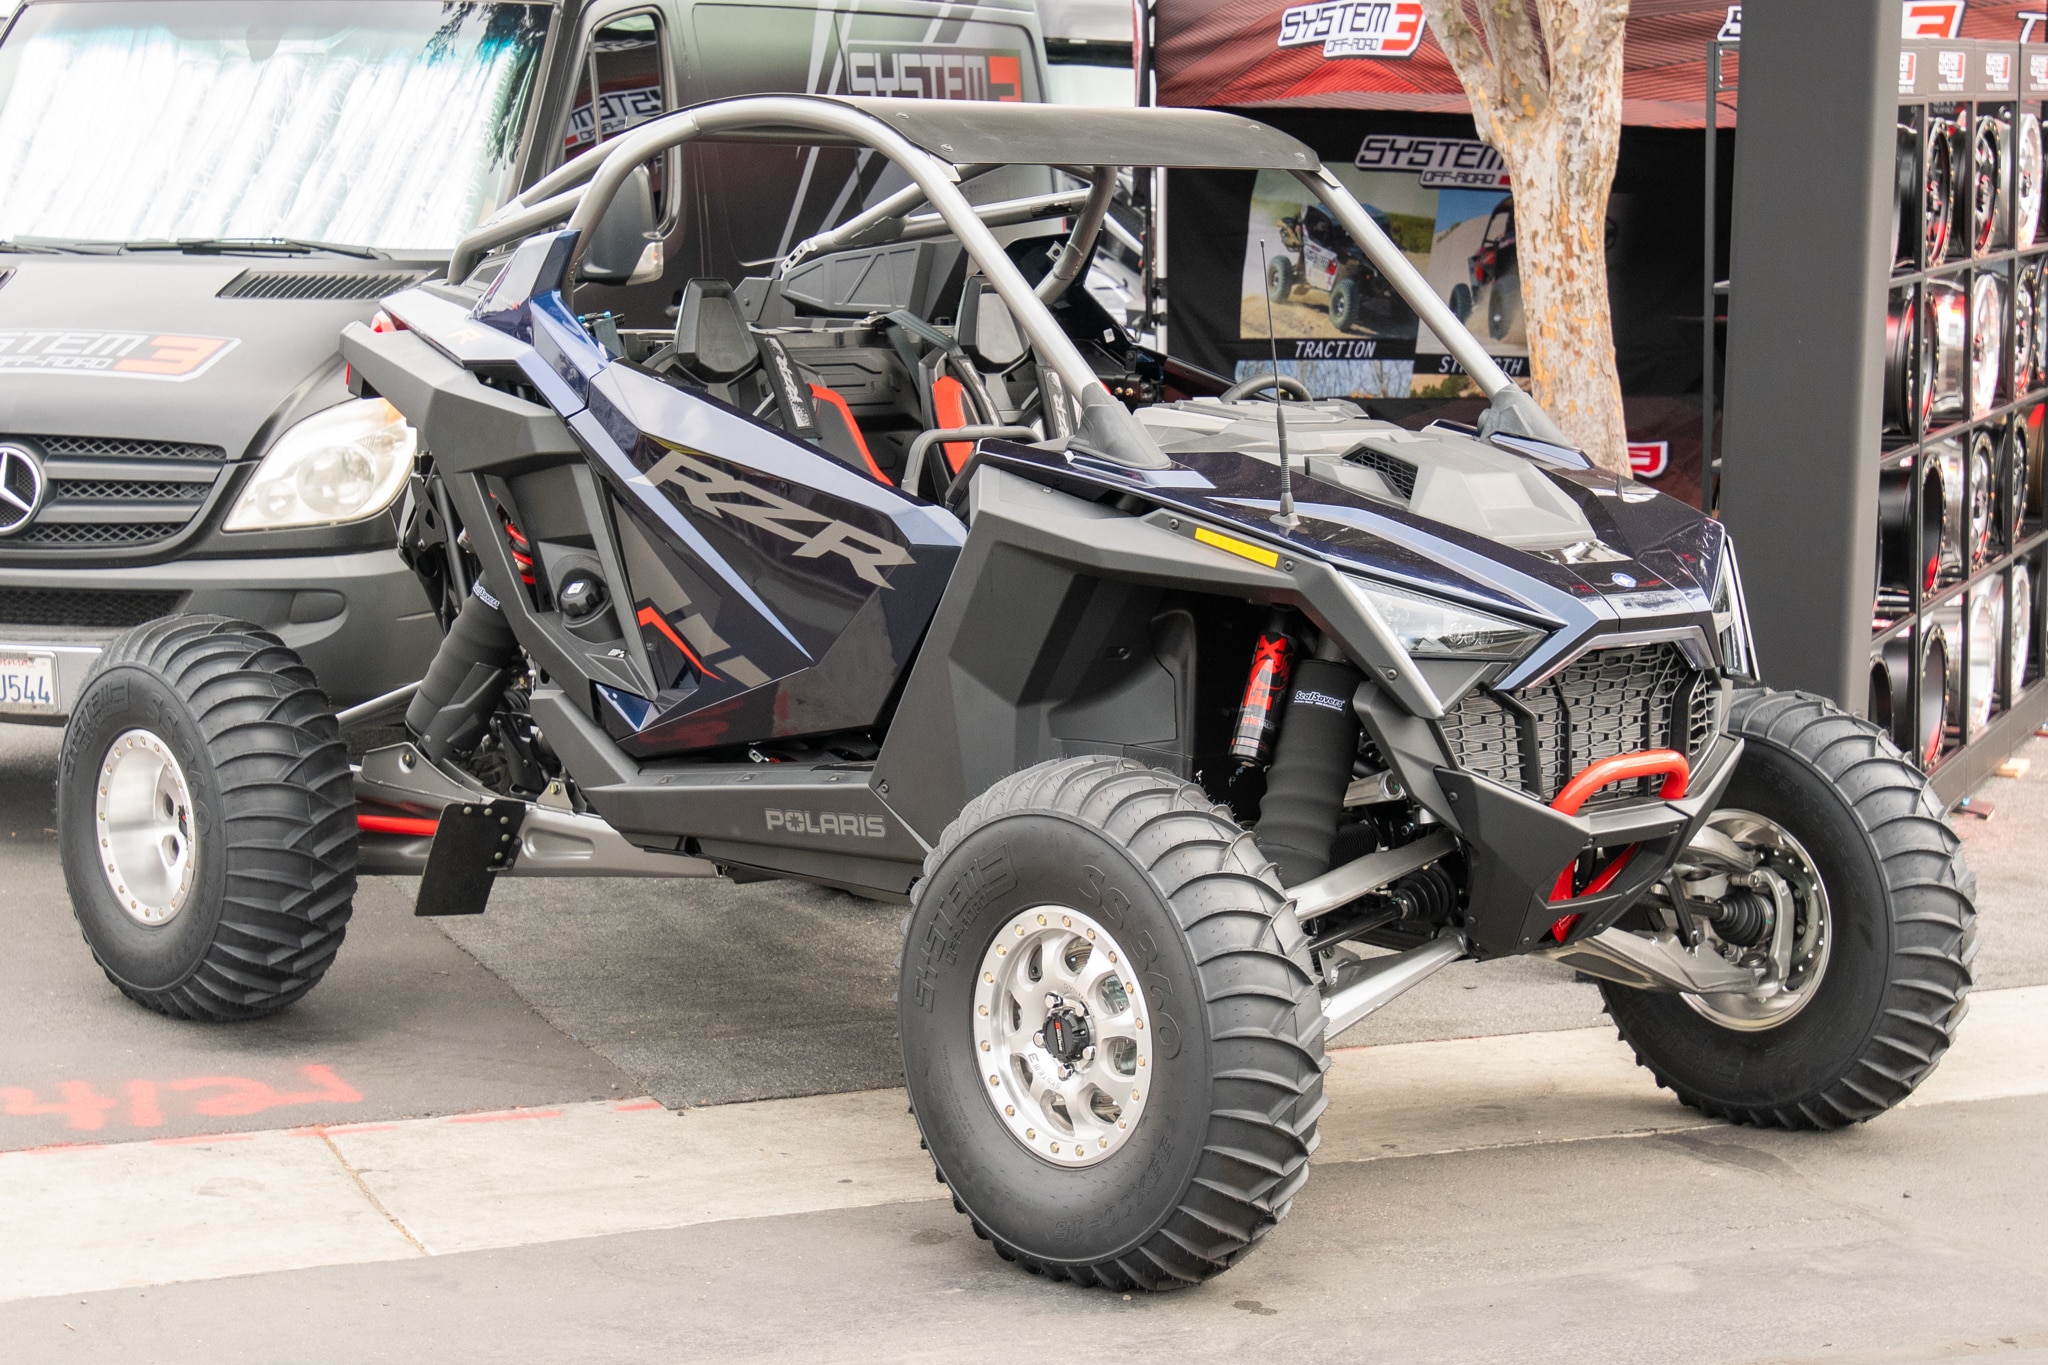 Polaris RZR Side by Side parked in front of an event booth